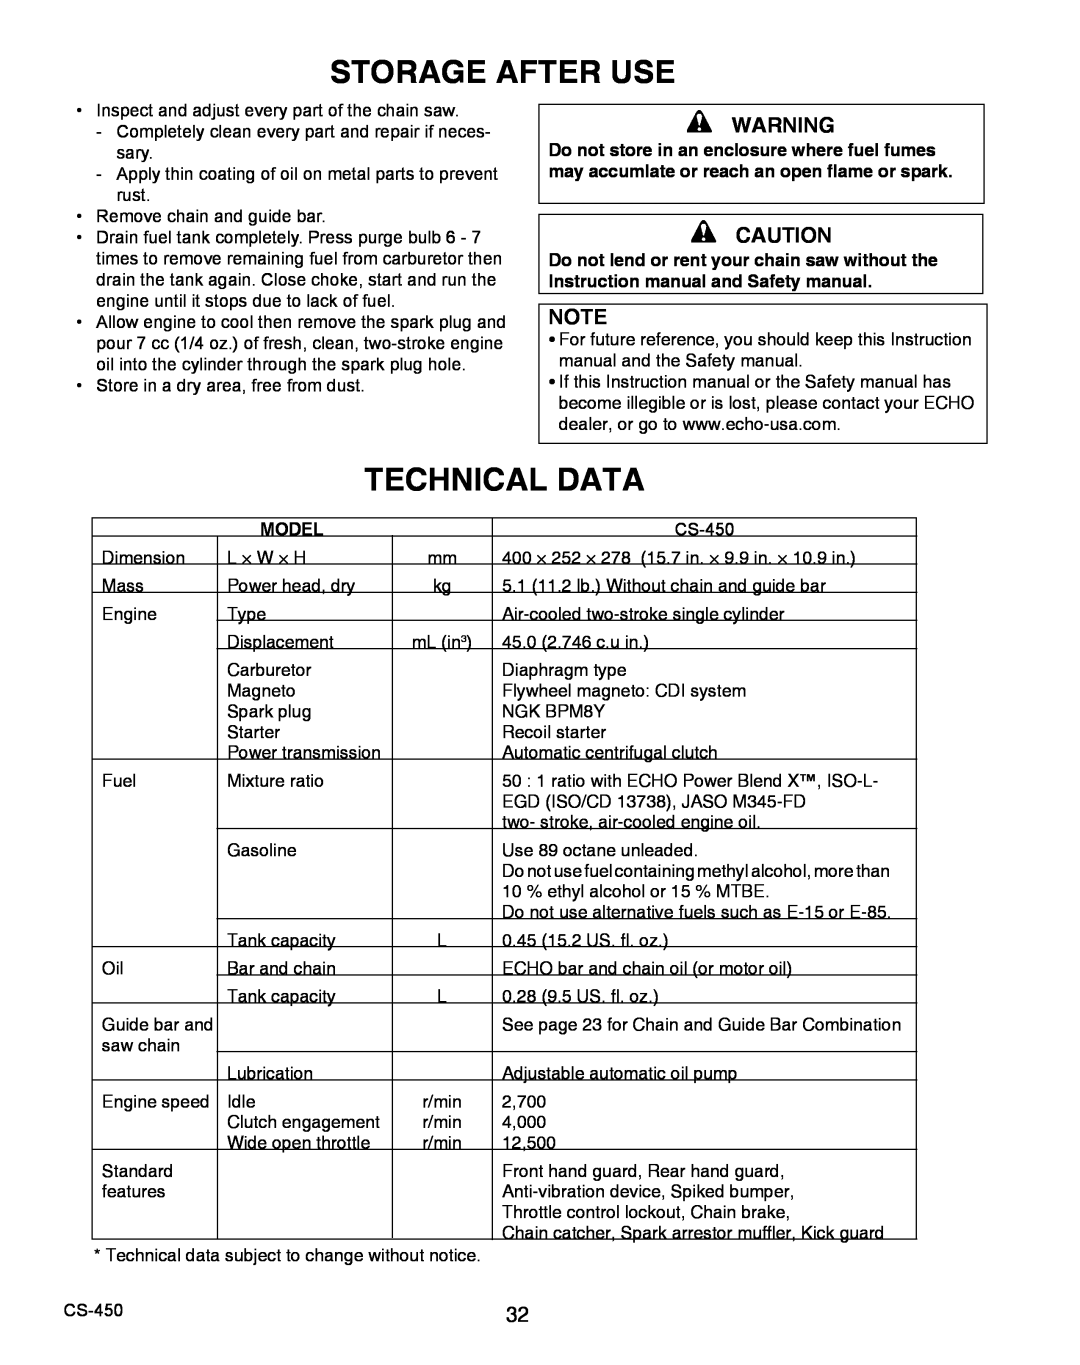 Echo X7503196704, X750010904 instruction manual Storage After Use, Technical Data, Model 